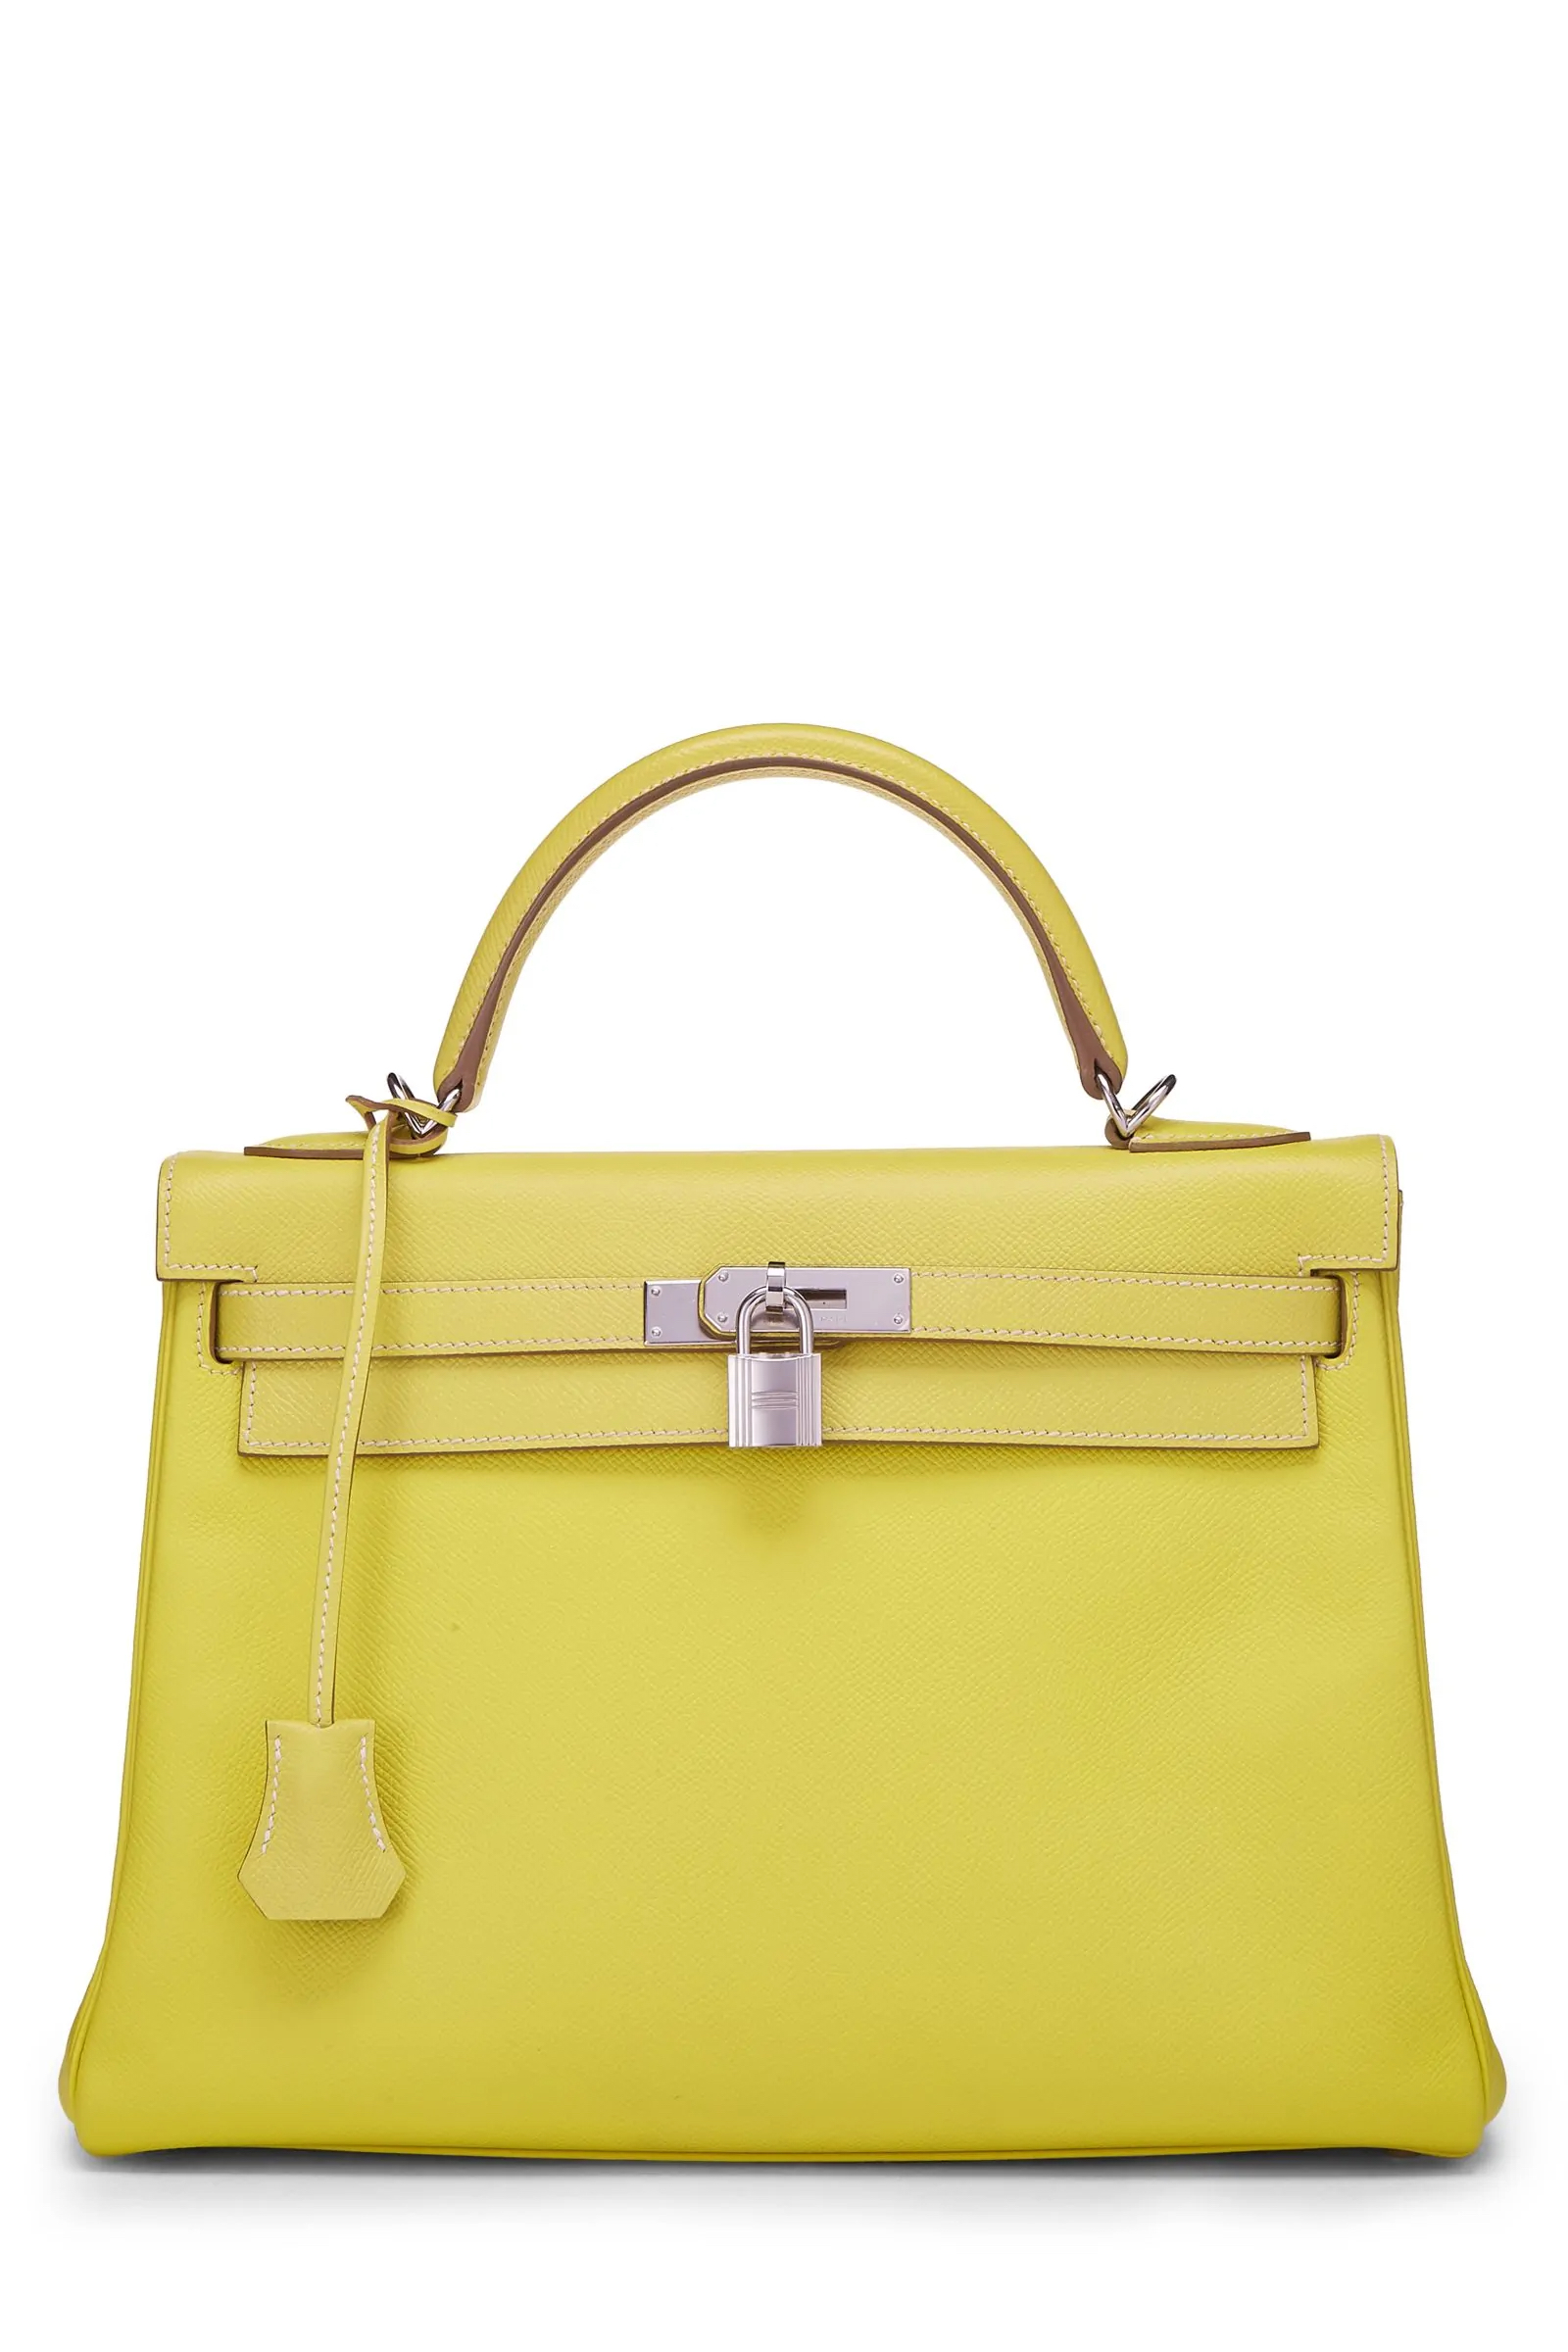 Birkin or Kelly? Mini or oversized, vintage or new – which Hermès handbags  will go up in value?